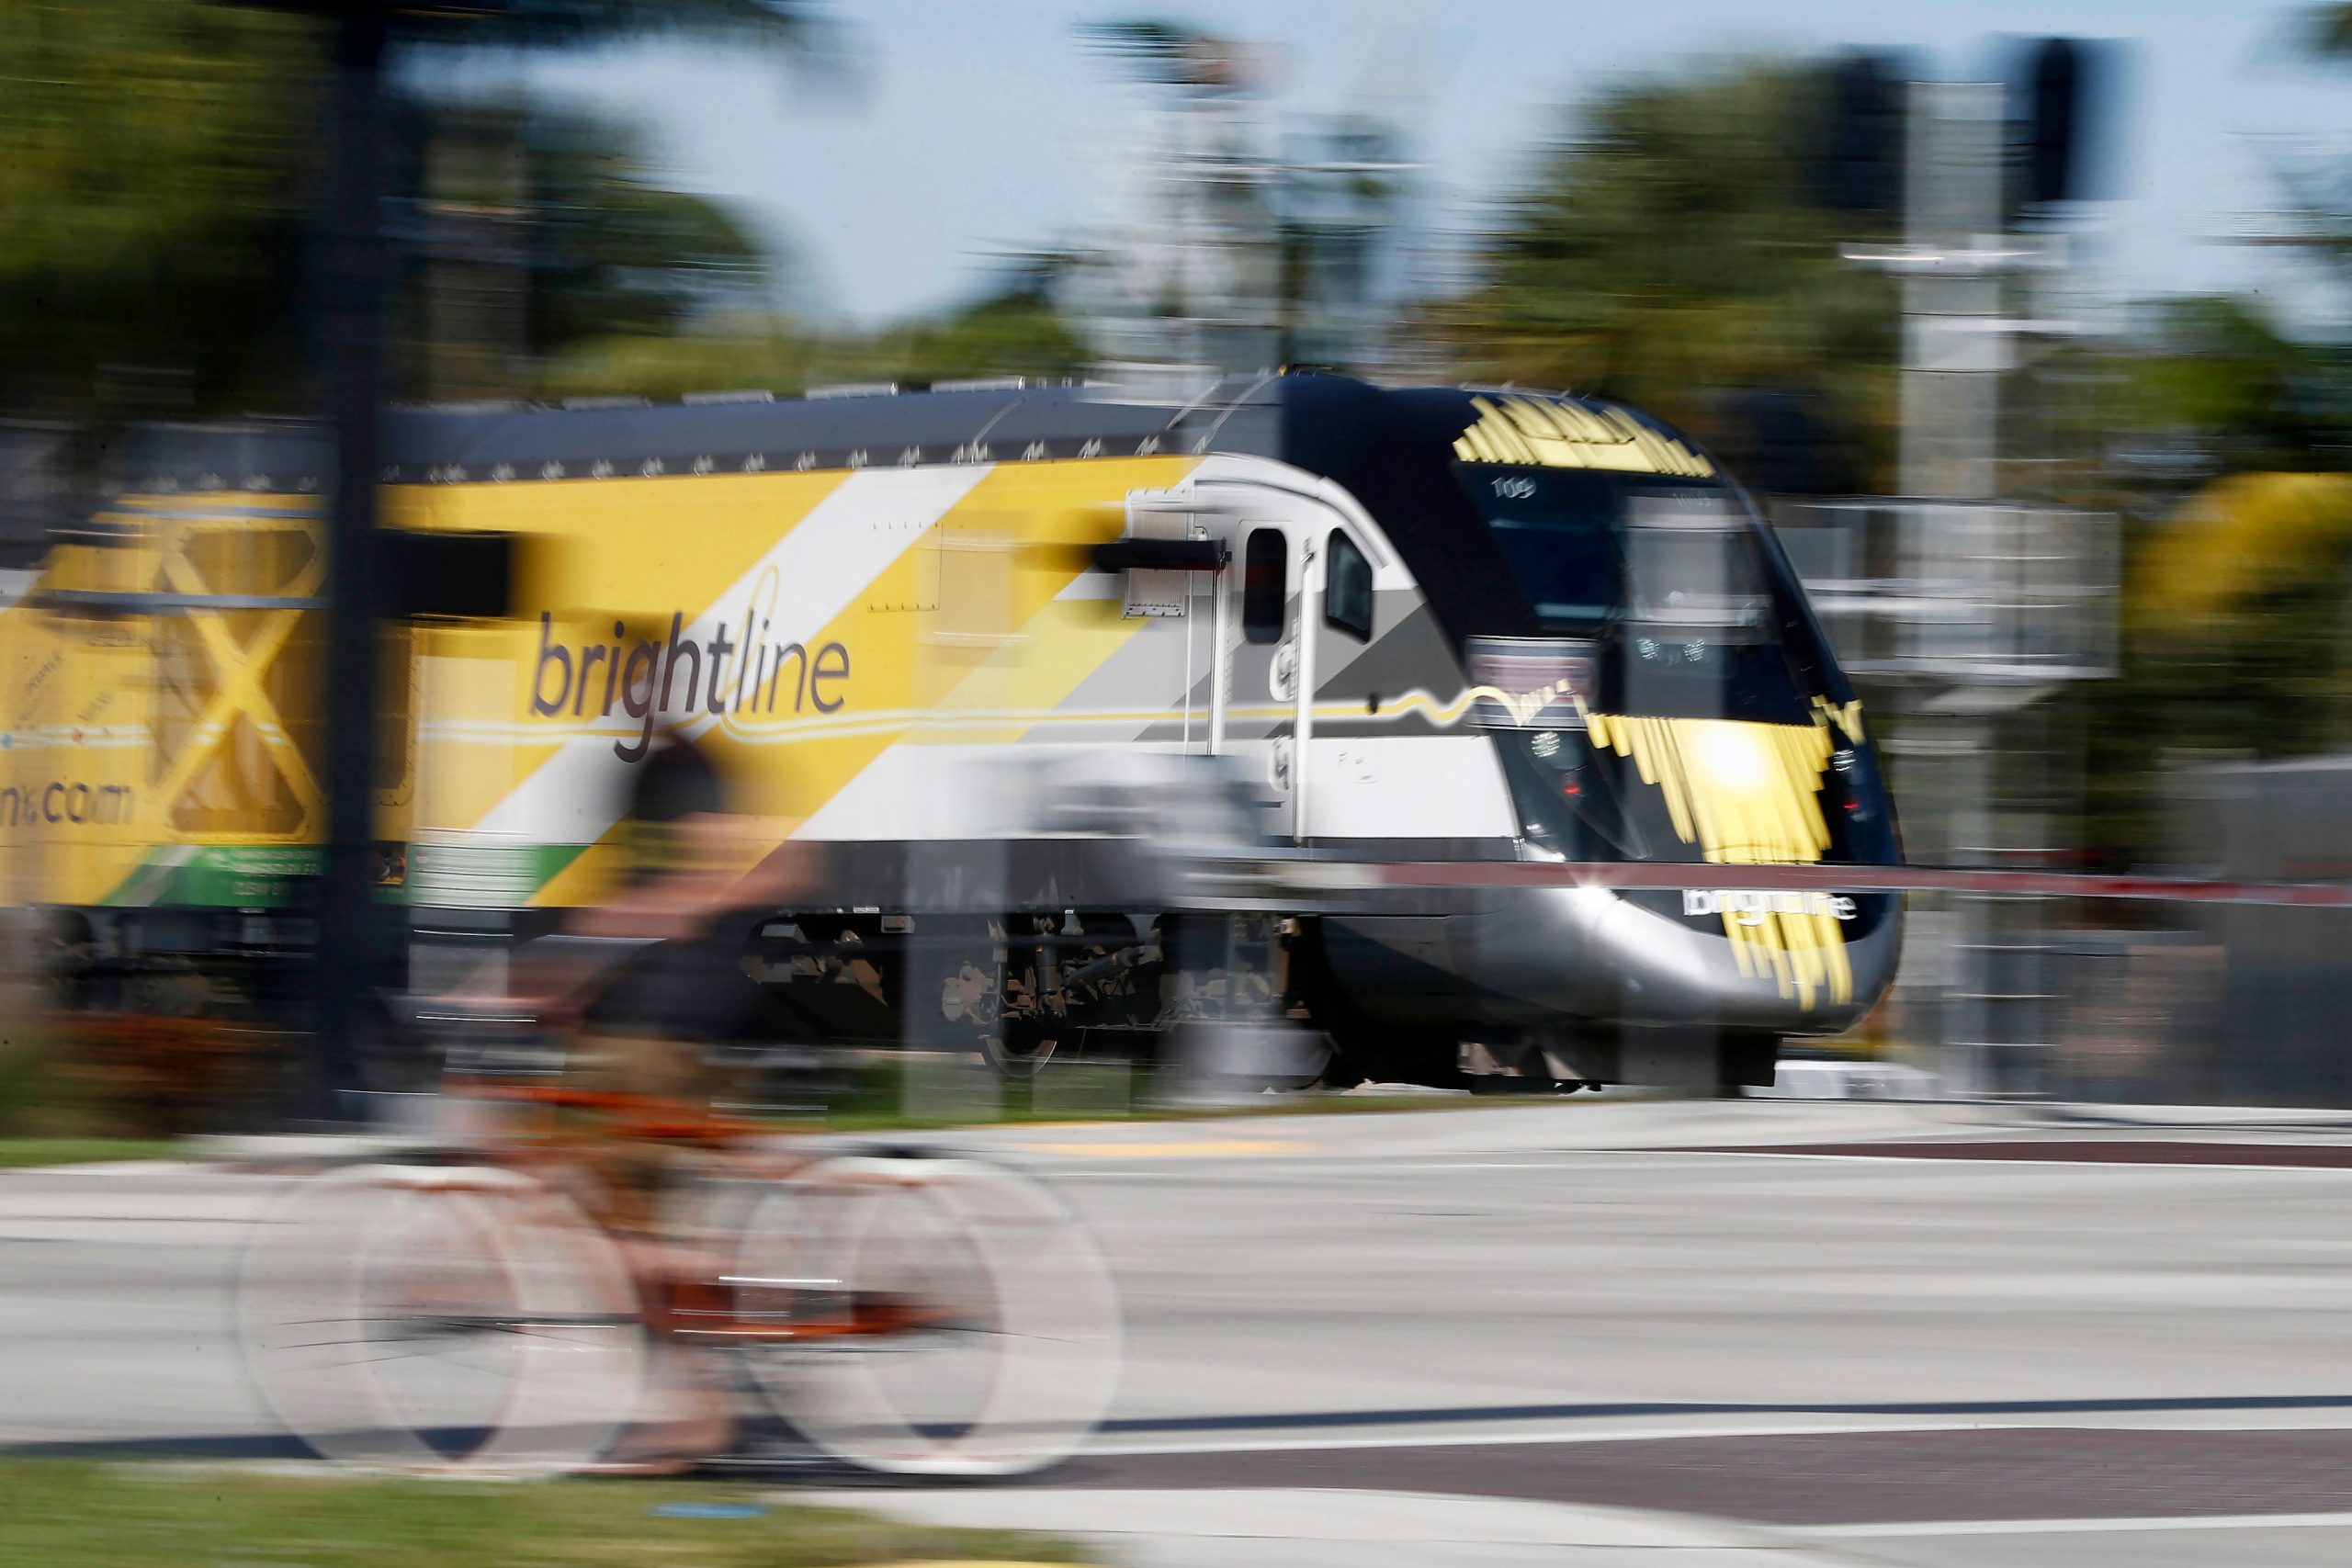 Florida high-speed rail deaths rise to 57 in 5 years